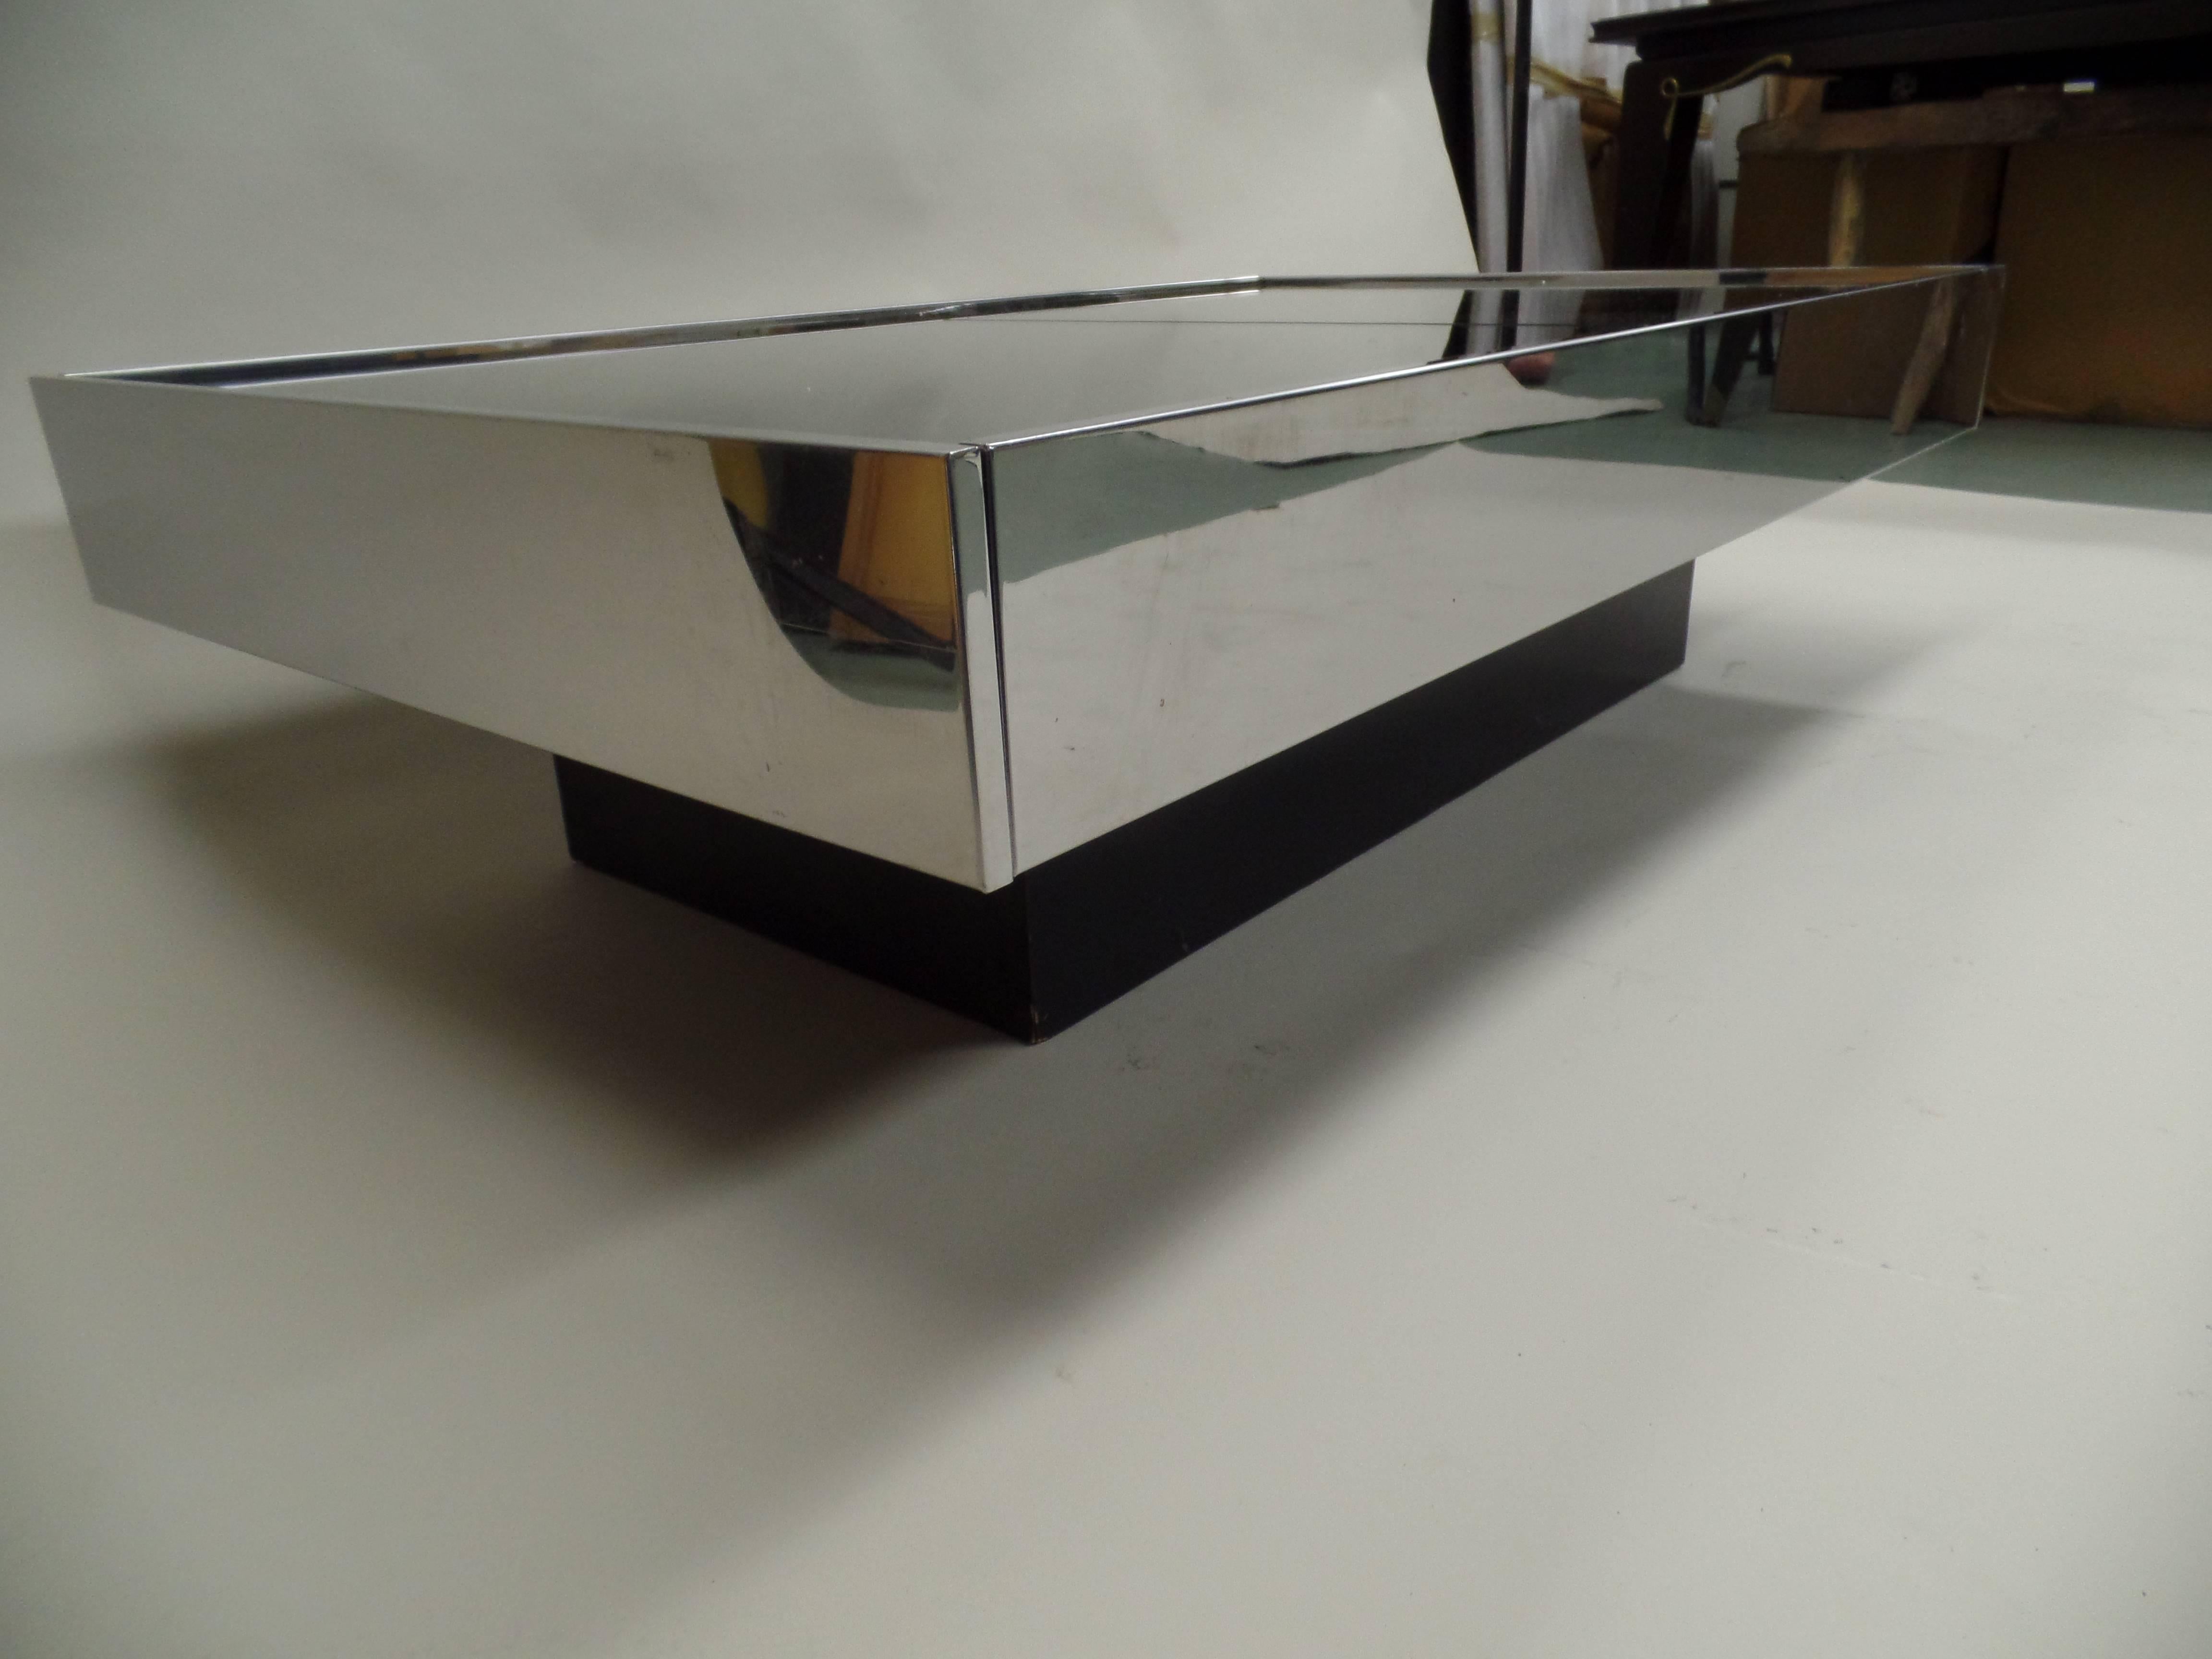 20th Century Expandable Italian Mid-Century Modern Coffee Table by Willy Rizzo for Cidue 1970